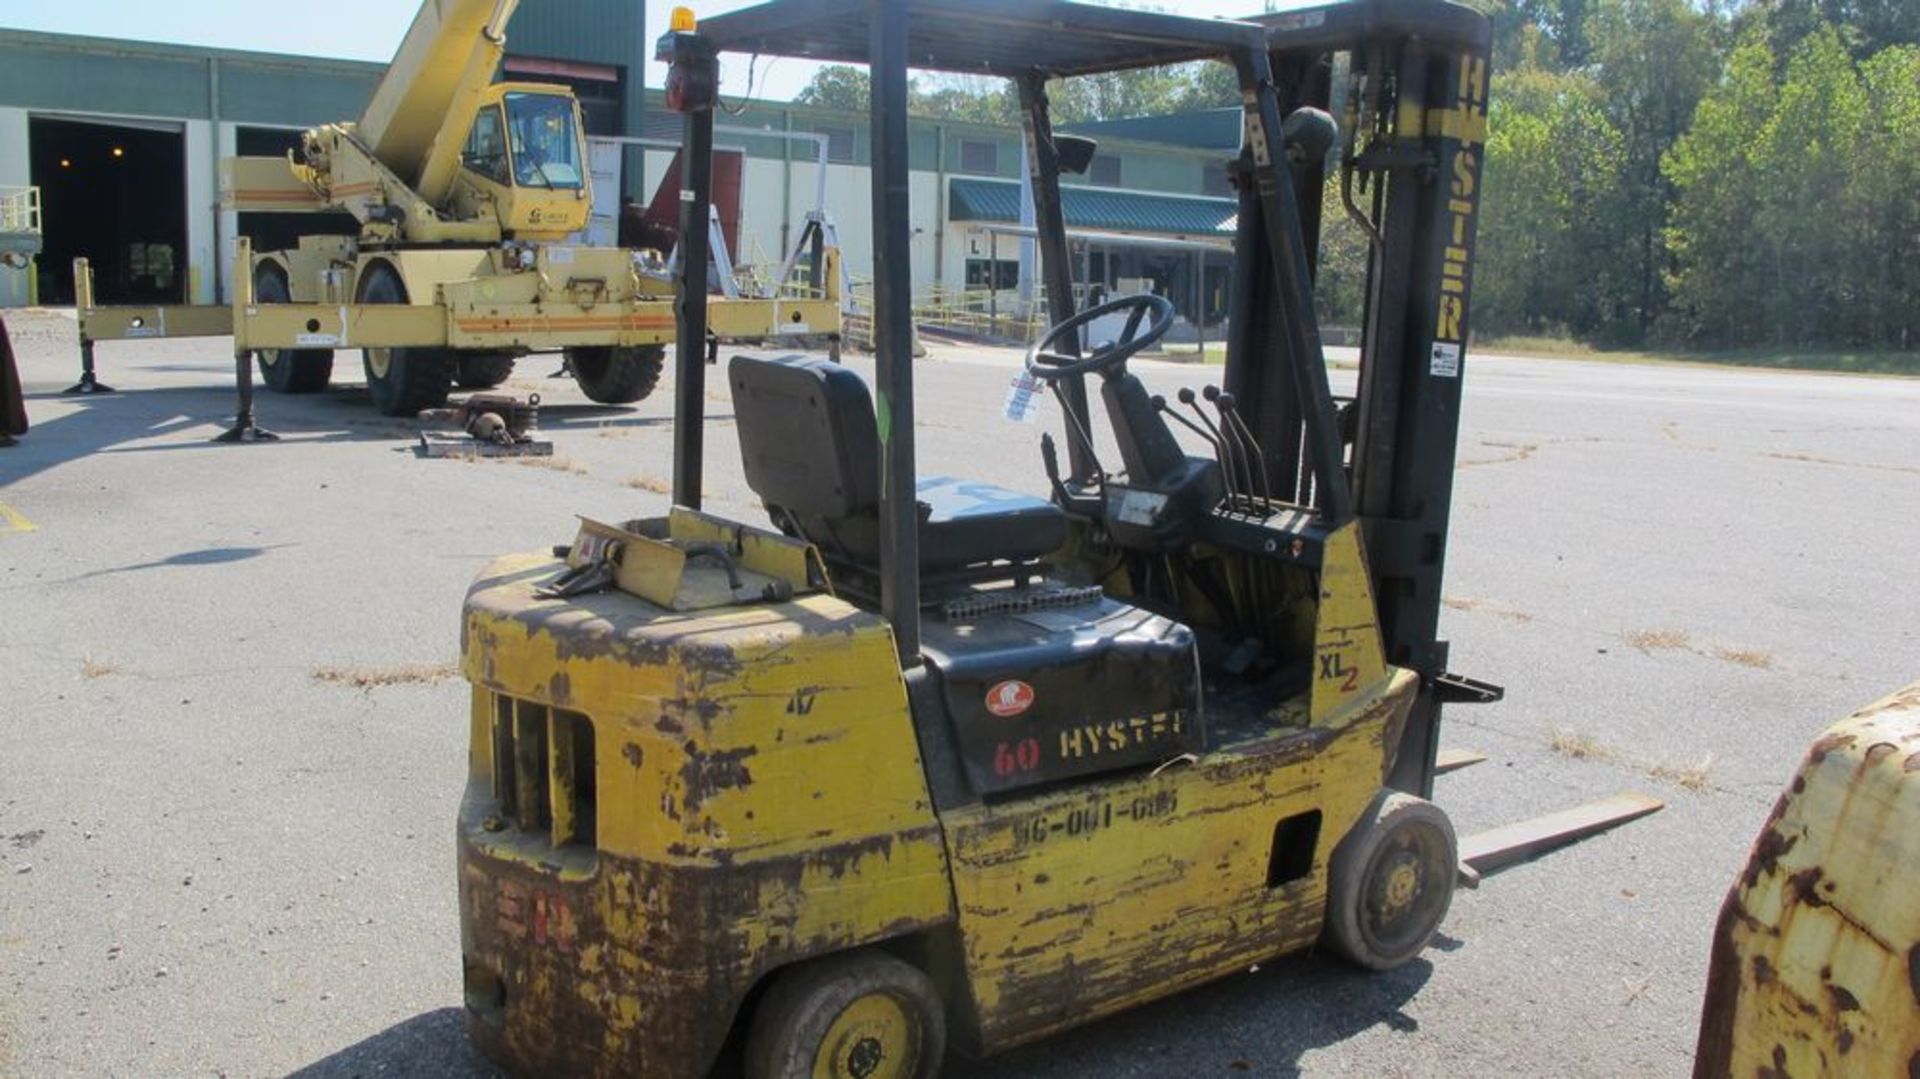 HYSTER S60XL PROPANE FORK TRUCK (NEEDS REPAIR), 4250 LB CAP, 3 STAGE, 191" LIFT, SOLID TIRES, 46" - Image 3 of 5